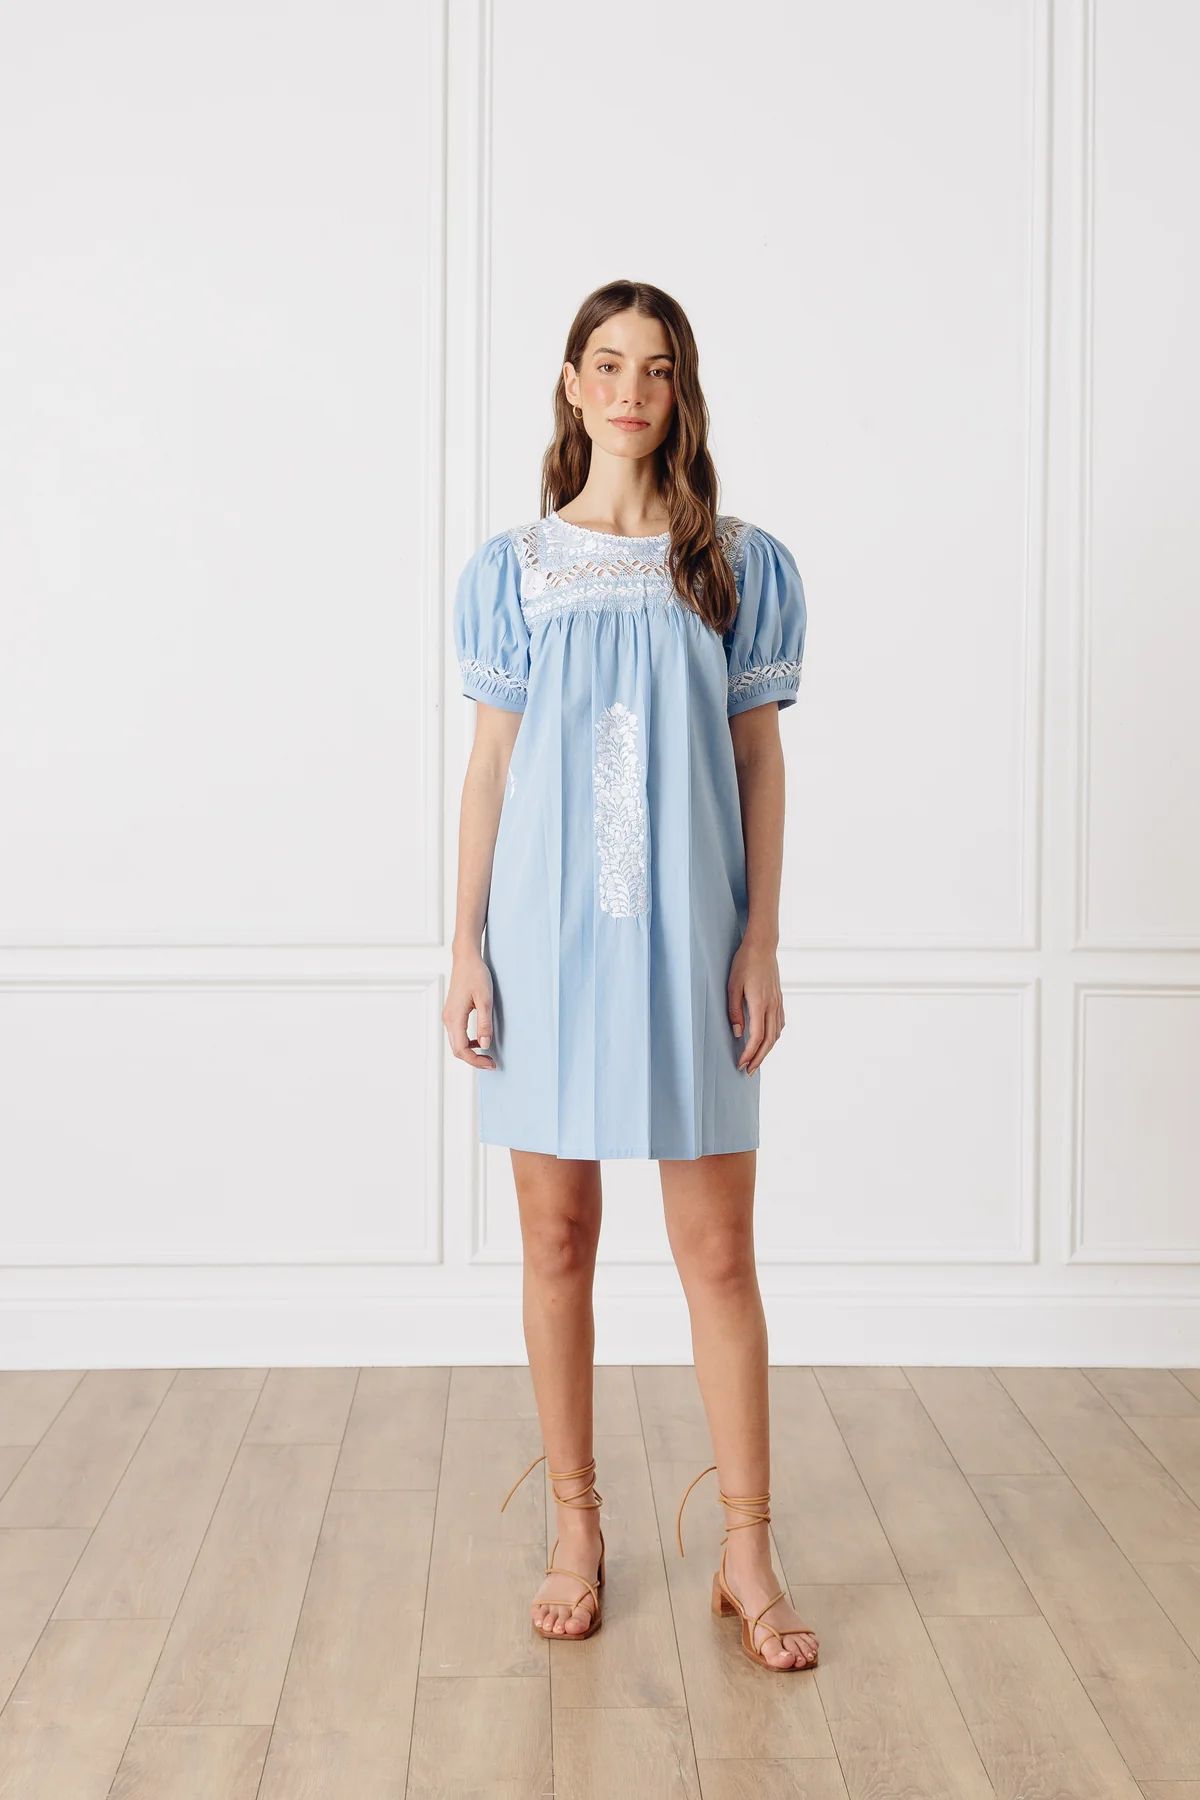 OTM Exclusive: Maria Short Dress | Over The Moon